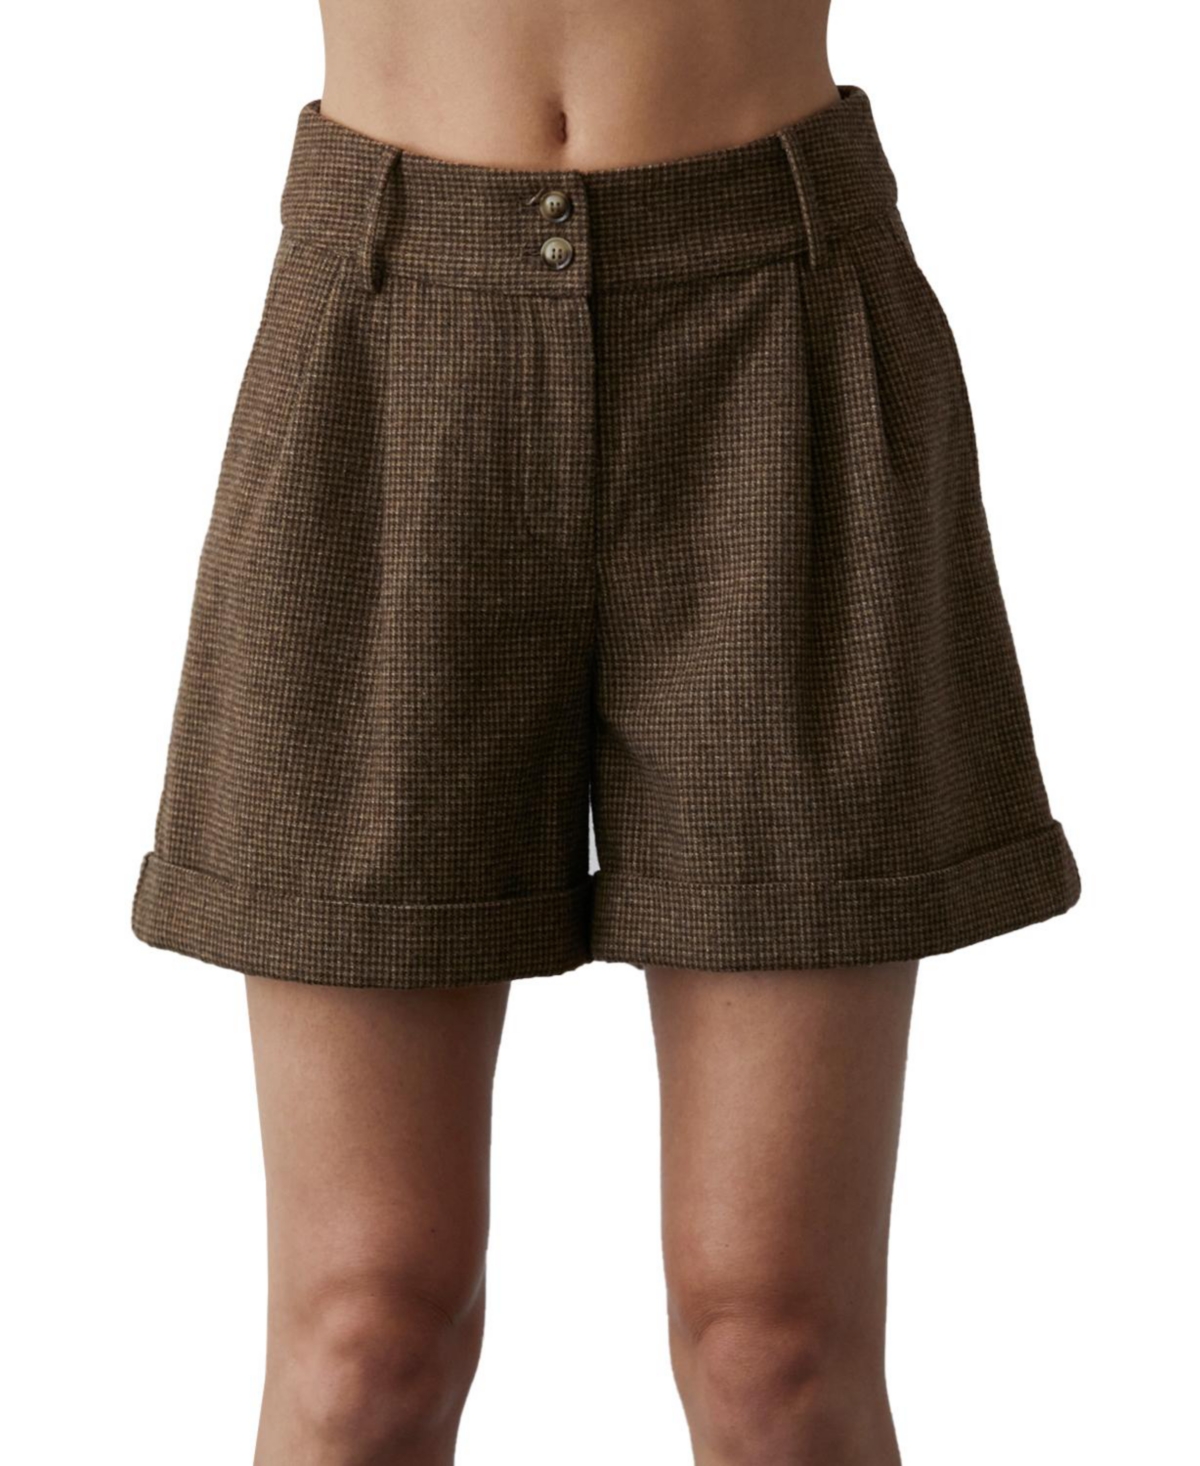 Women's Lexie Mini Hounds tooth Shorts - Brown